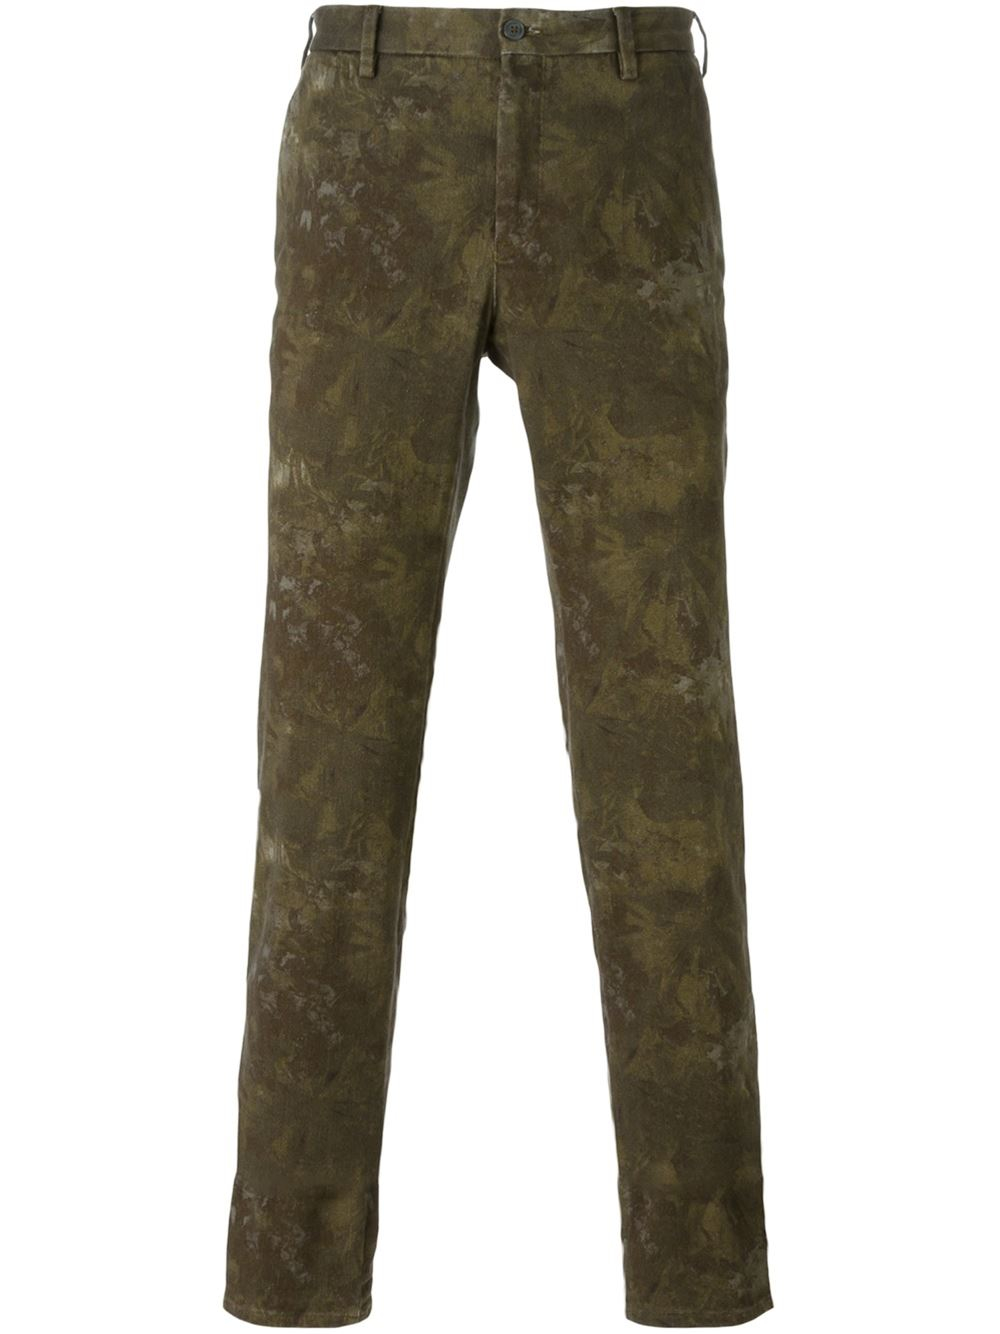 Lyst - PT01 Camouflage Print Slim Fit Trousers in Brown for Men